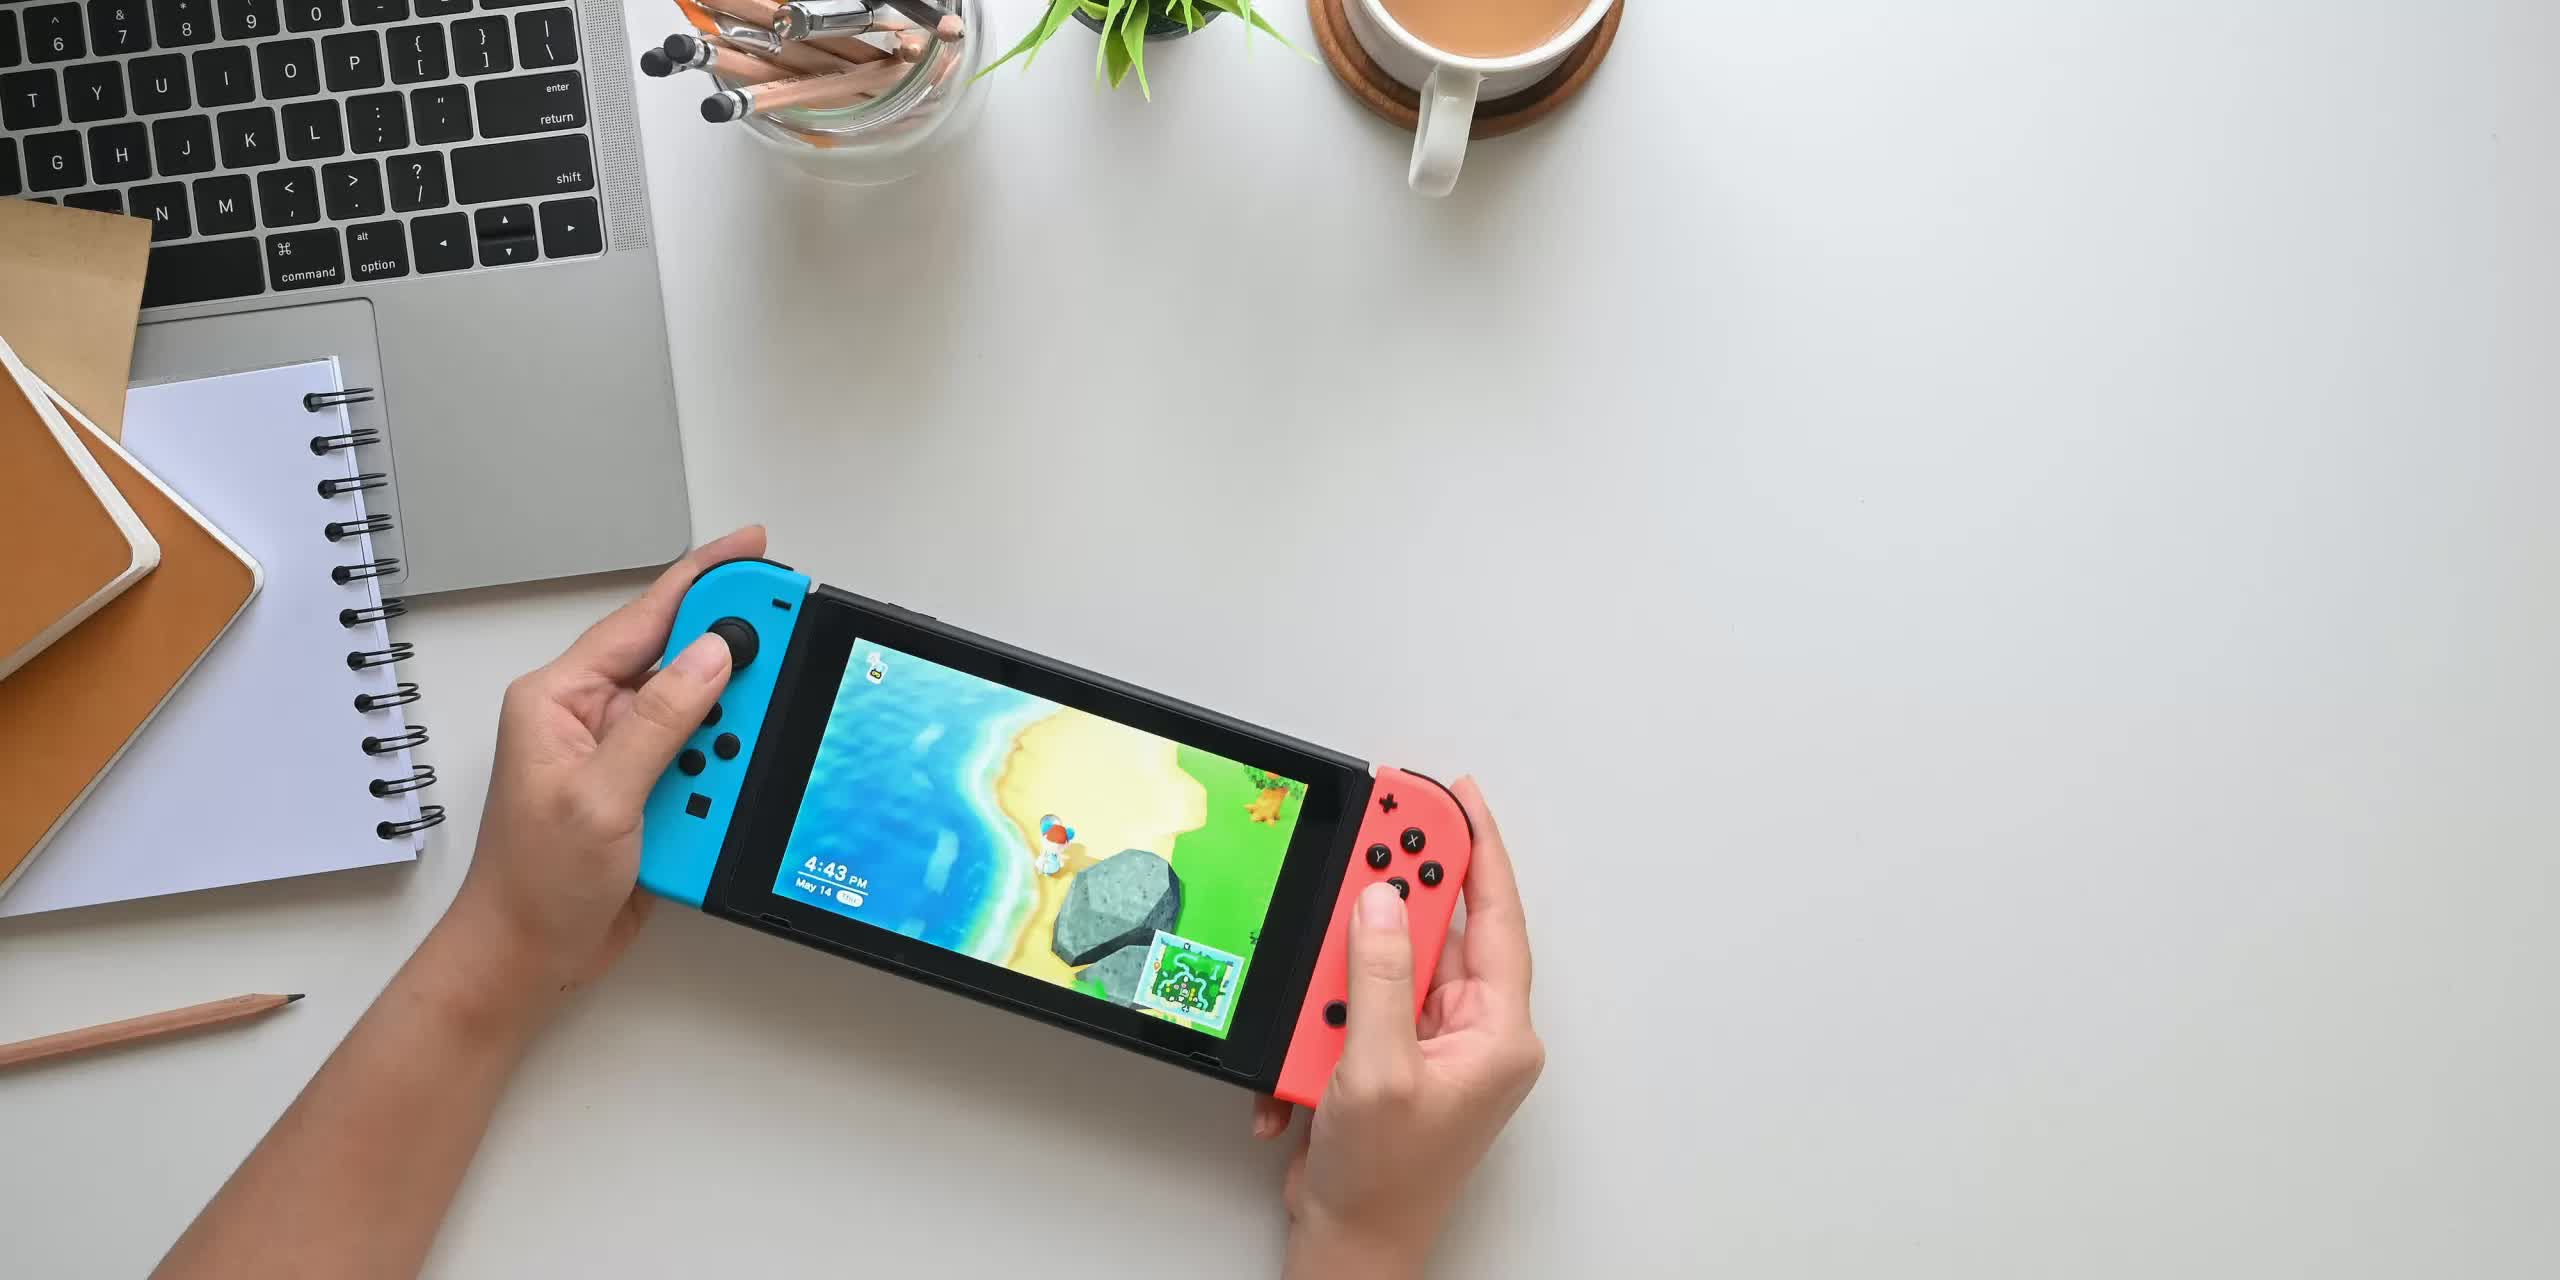 The Nintendo Switch continues to sell like hotcakes three years after launch